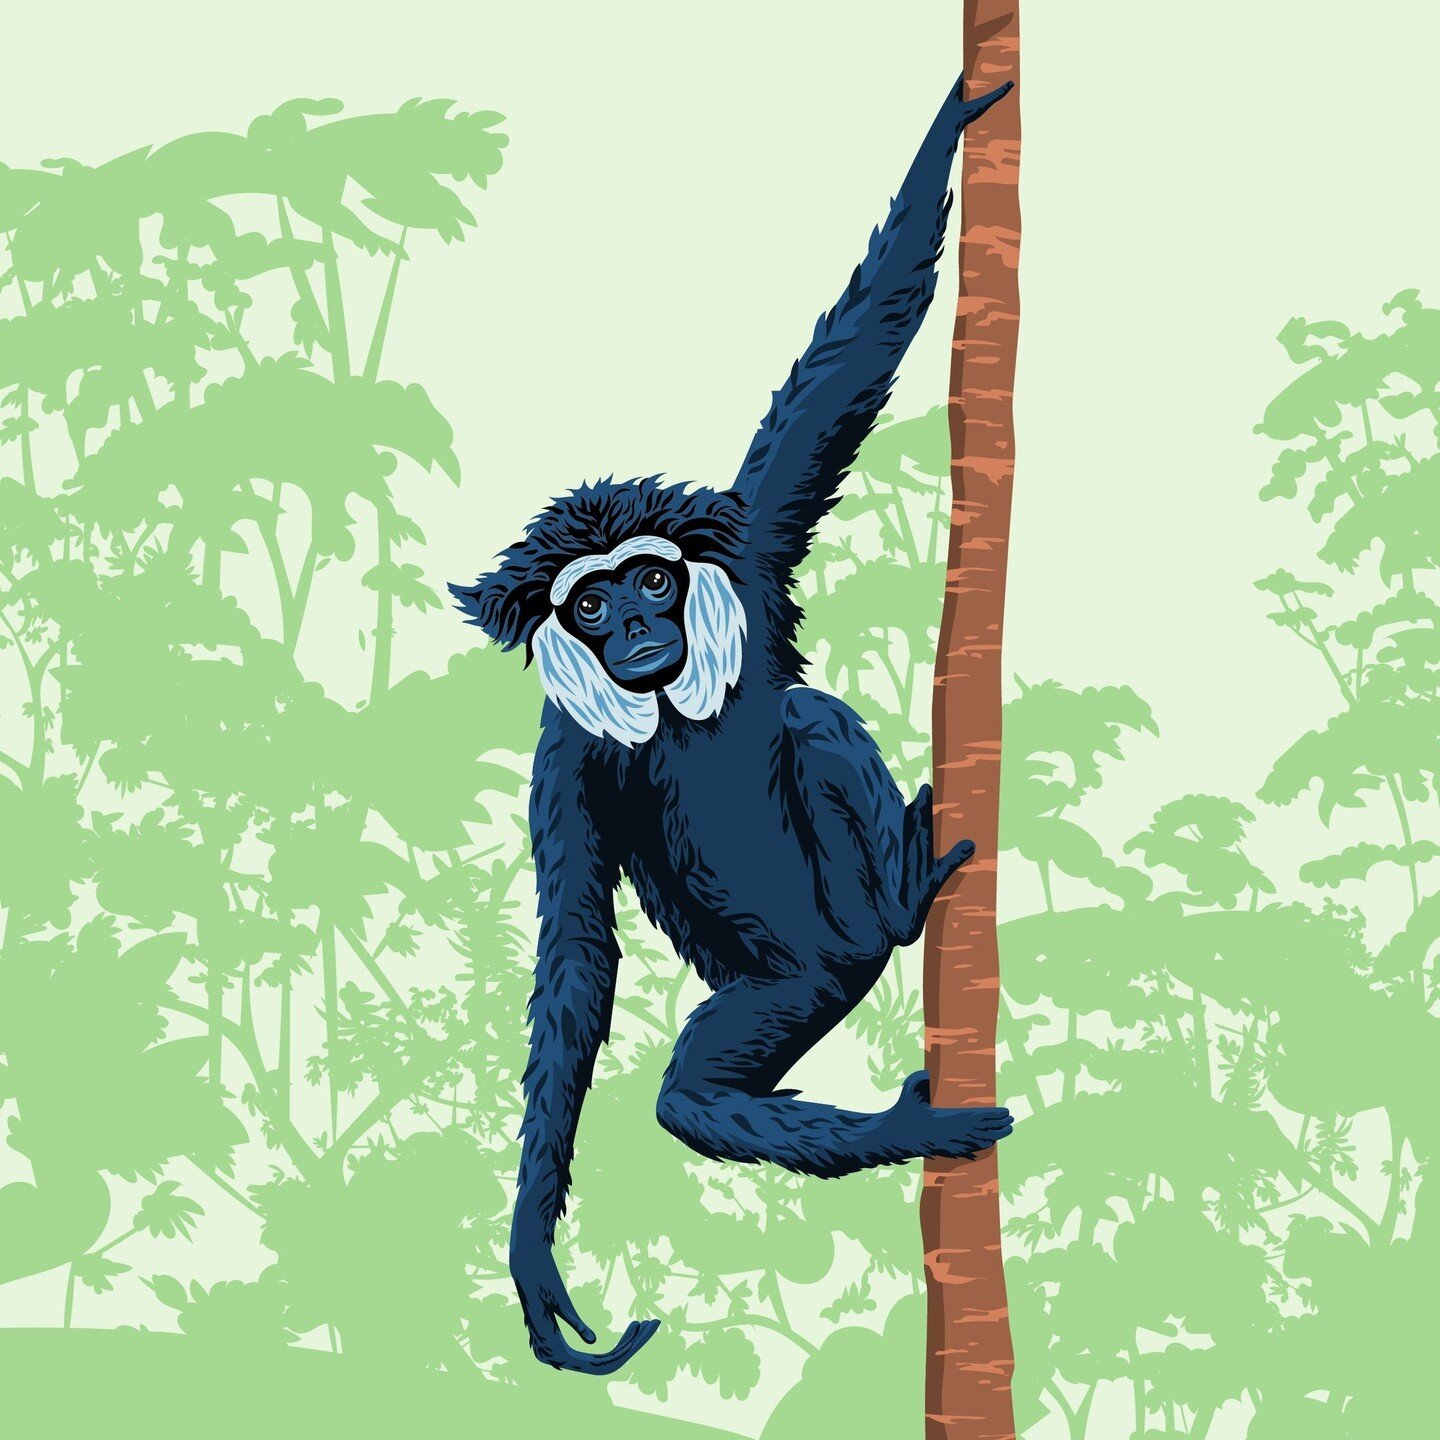 It's National Wildlife Day! This is the Agile Gibbon, a primate found in southeast Asia that is endangered due to habitat destruction and the illegal pet trade. I love these primates because of their funny little sideburns that make them look like an